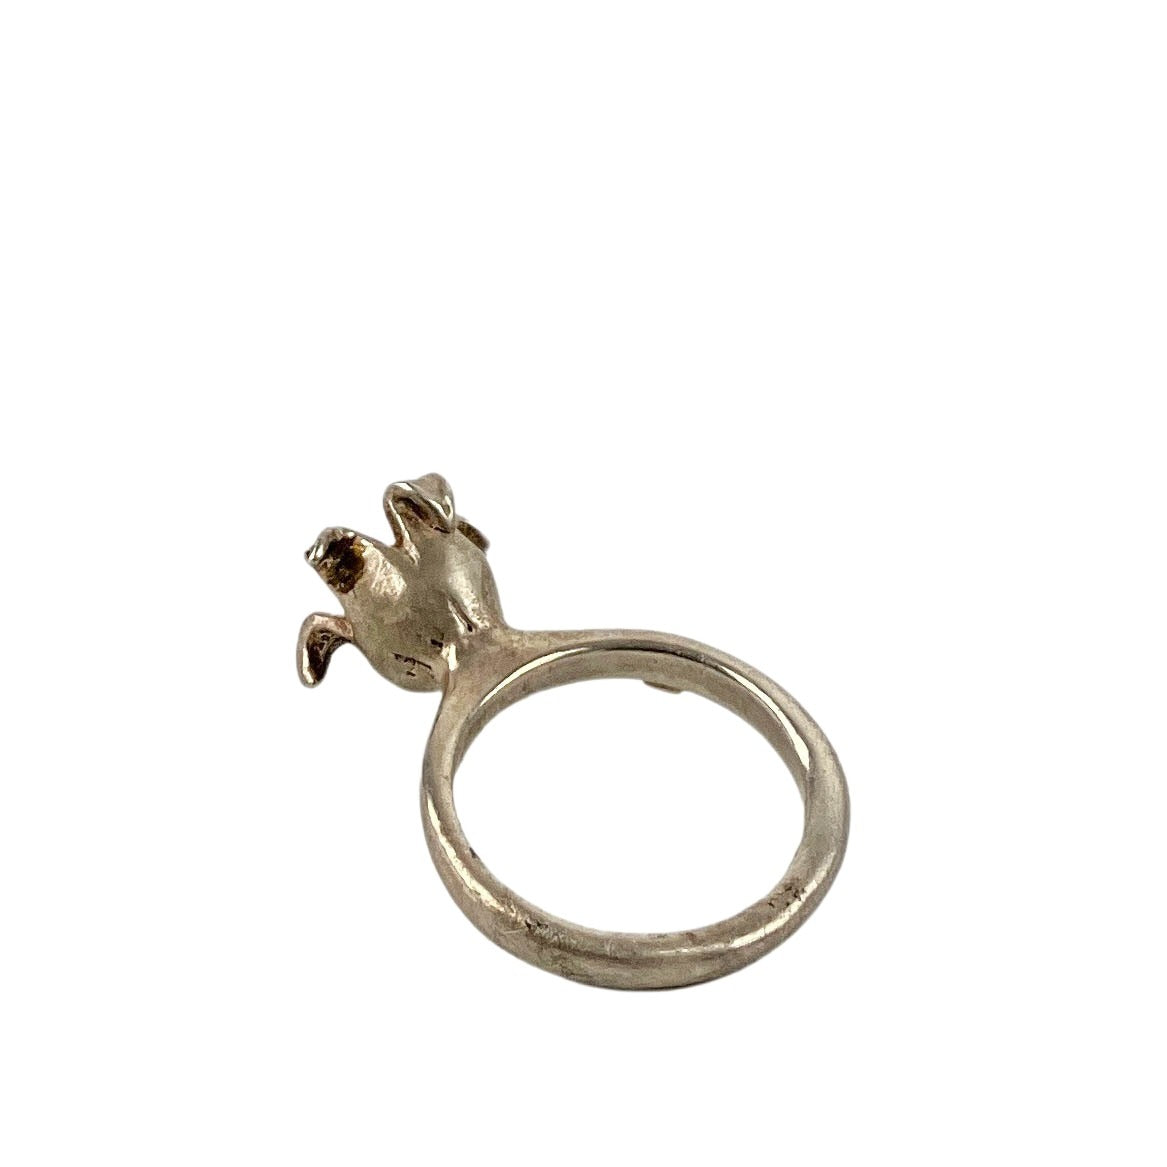 Rosa Maria Valeria 3 Flower Ring in Silver - Discounts on Rosa Maria at UAL